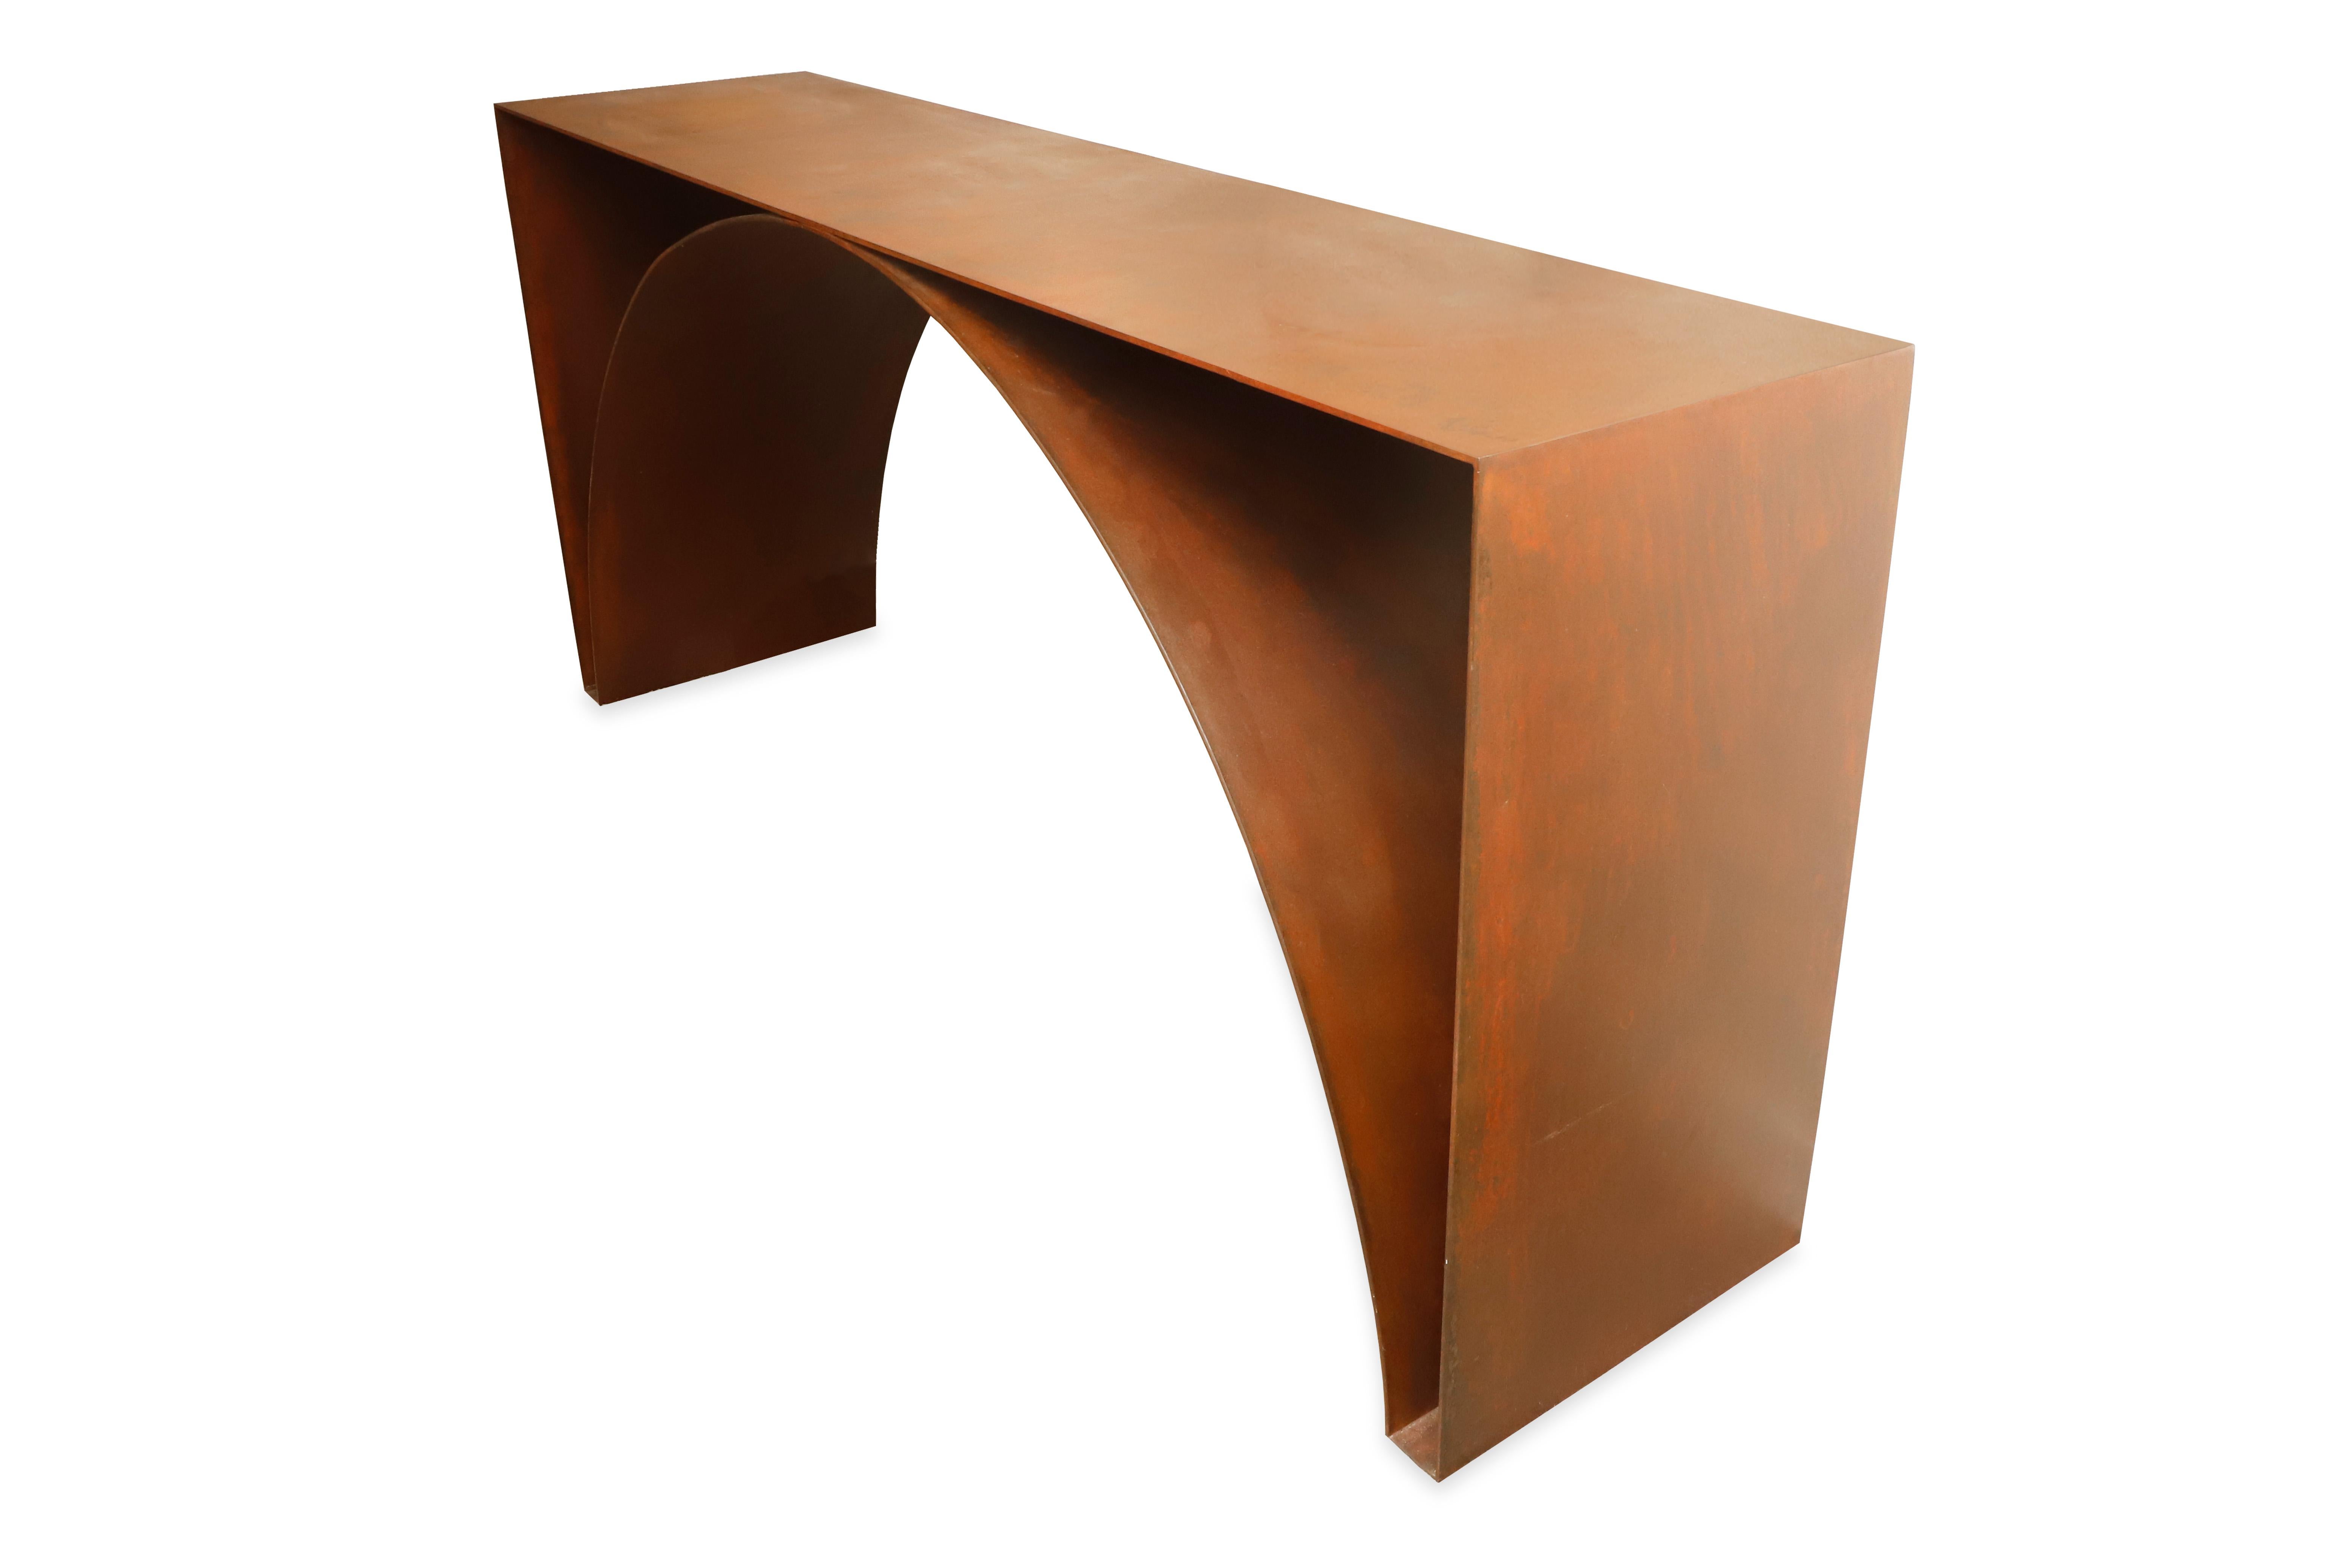 American Steel Arch Console Table in Rex Oxide Finish by Juan Montoya For Sale